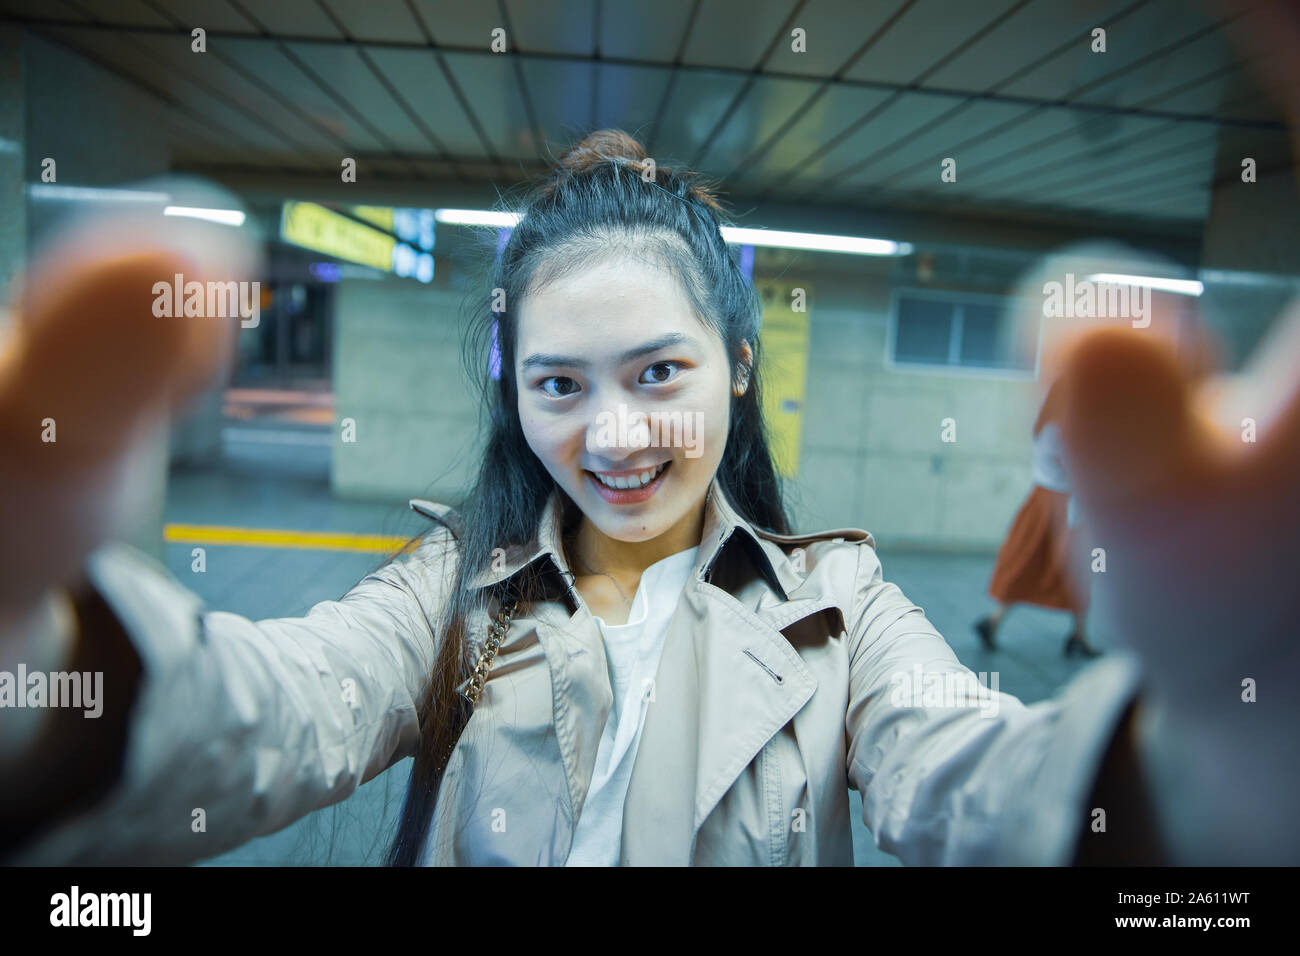 Selfie portrait of smiling young woman at Ginza underground station, Tokyo, Japan Stock Photo